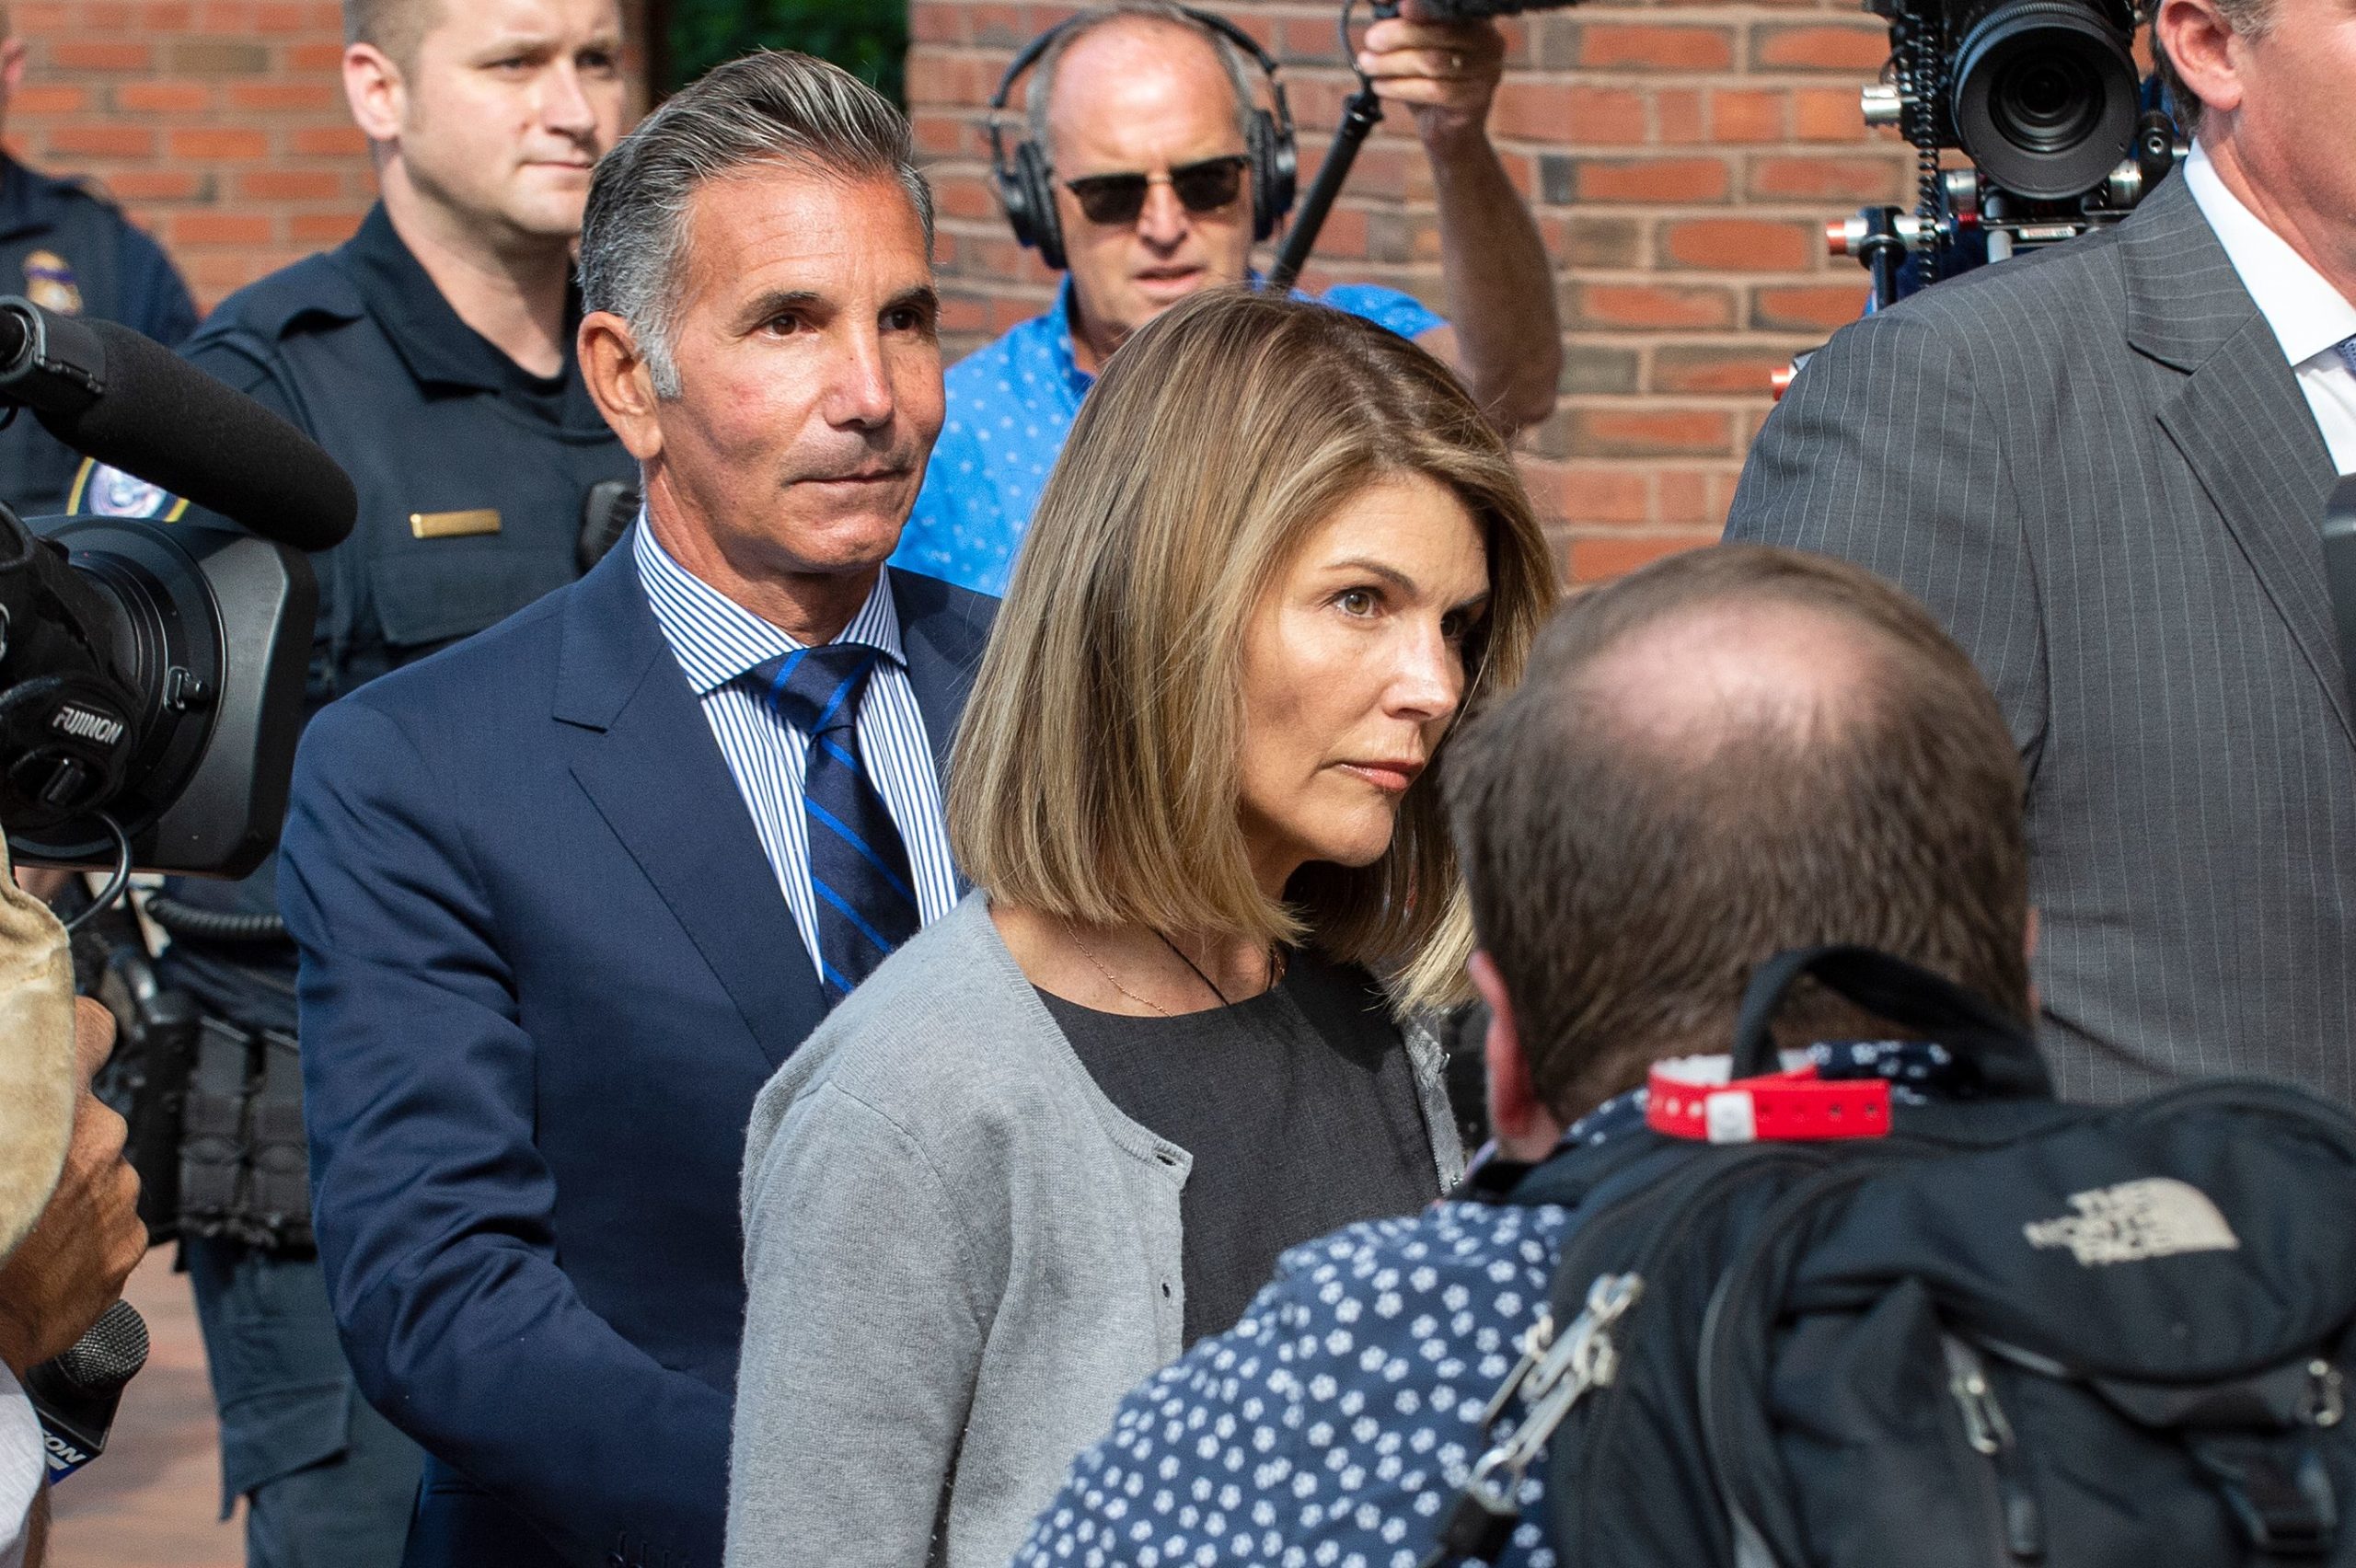 Actress Lori Loughlin and husband Mossimo Giannulli exit the Boston Federal Court house after a pre-trial hearing with Magistrate Judge Kelley at the John Joseph Moakley US Courthouse in Boston on August 27, 2019. (Photo by JOSEPH PREZIOSO/AFP via Getty Images)